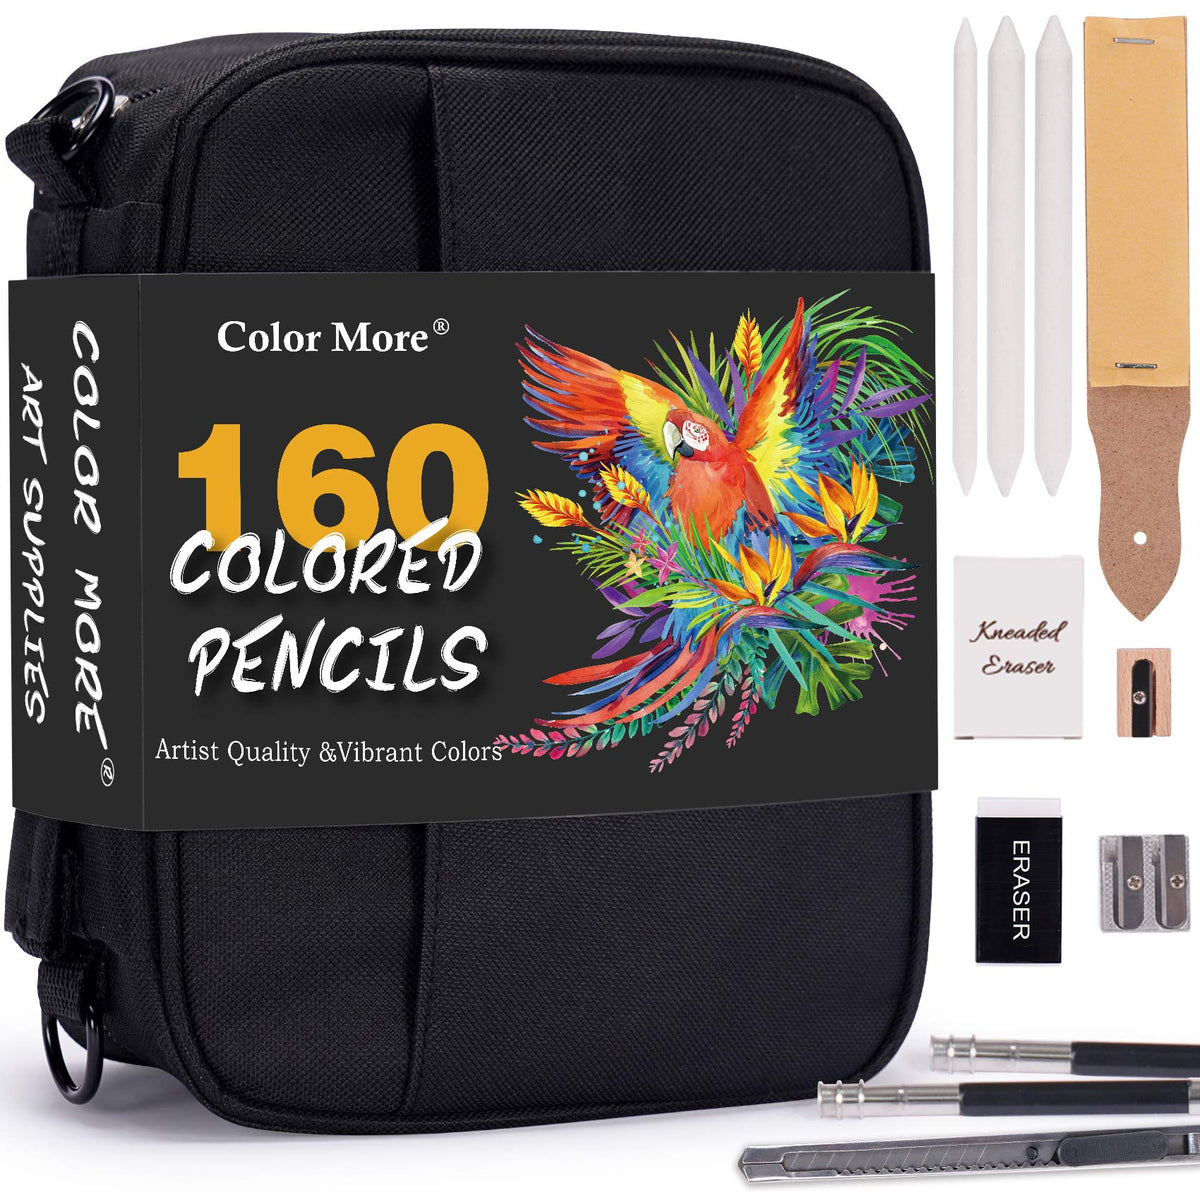 12pcs/set Colored Pencils for Adult Coloring, Drawing Pencils with Soft  Oil-Based Cores, Professional Art Supplies for Artists, Vibrant Pencil Set  in Tin Box for Beginners and Pro Artists.